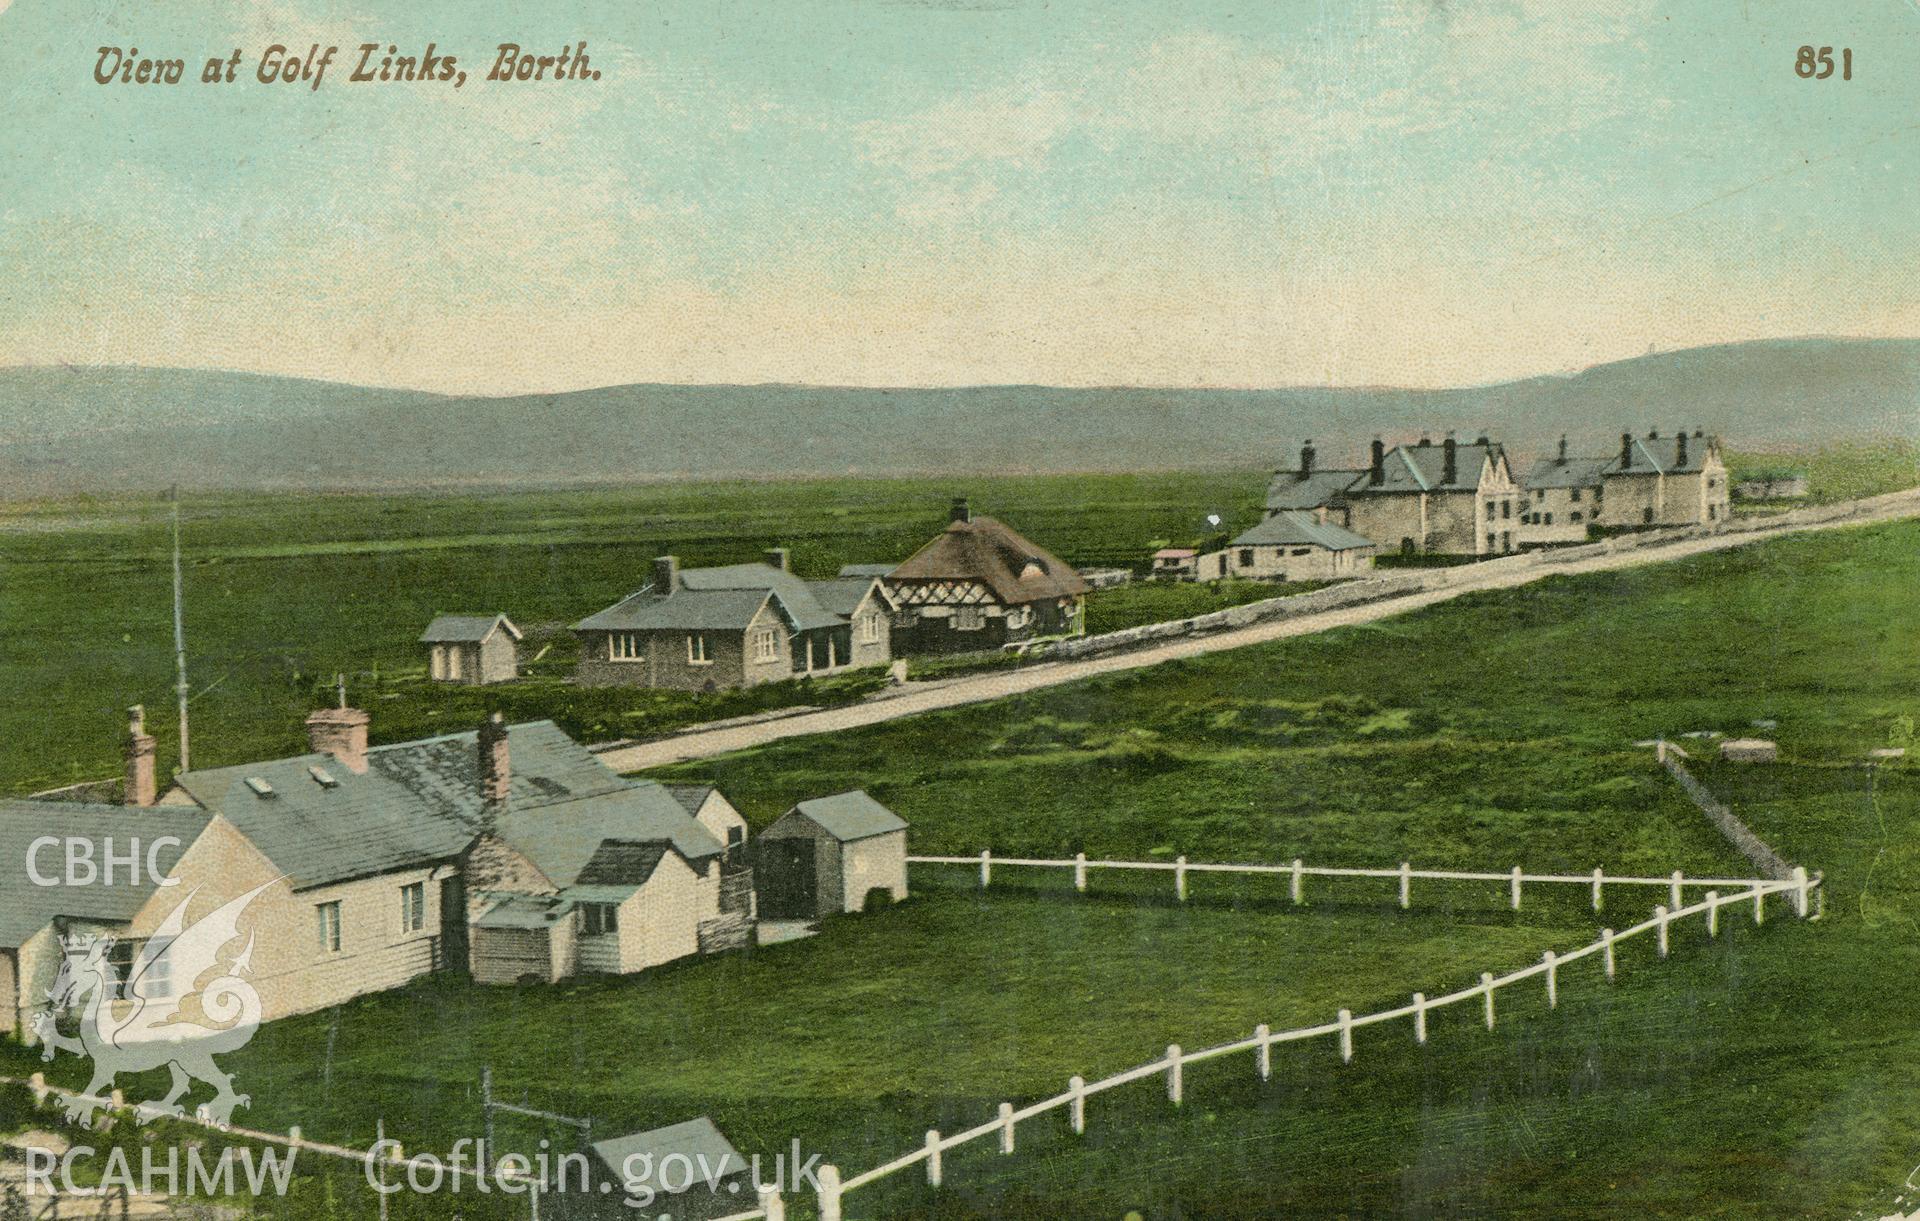 Digital copy of postcard showing View at Golf Links, Borth, dated 1910 (Publisher: George & Son).  Loaned for copying by Charlie Downes.